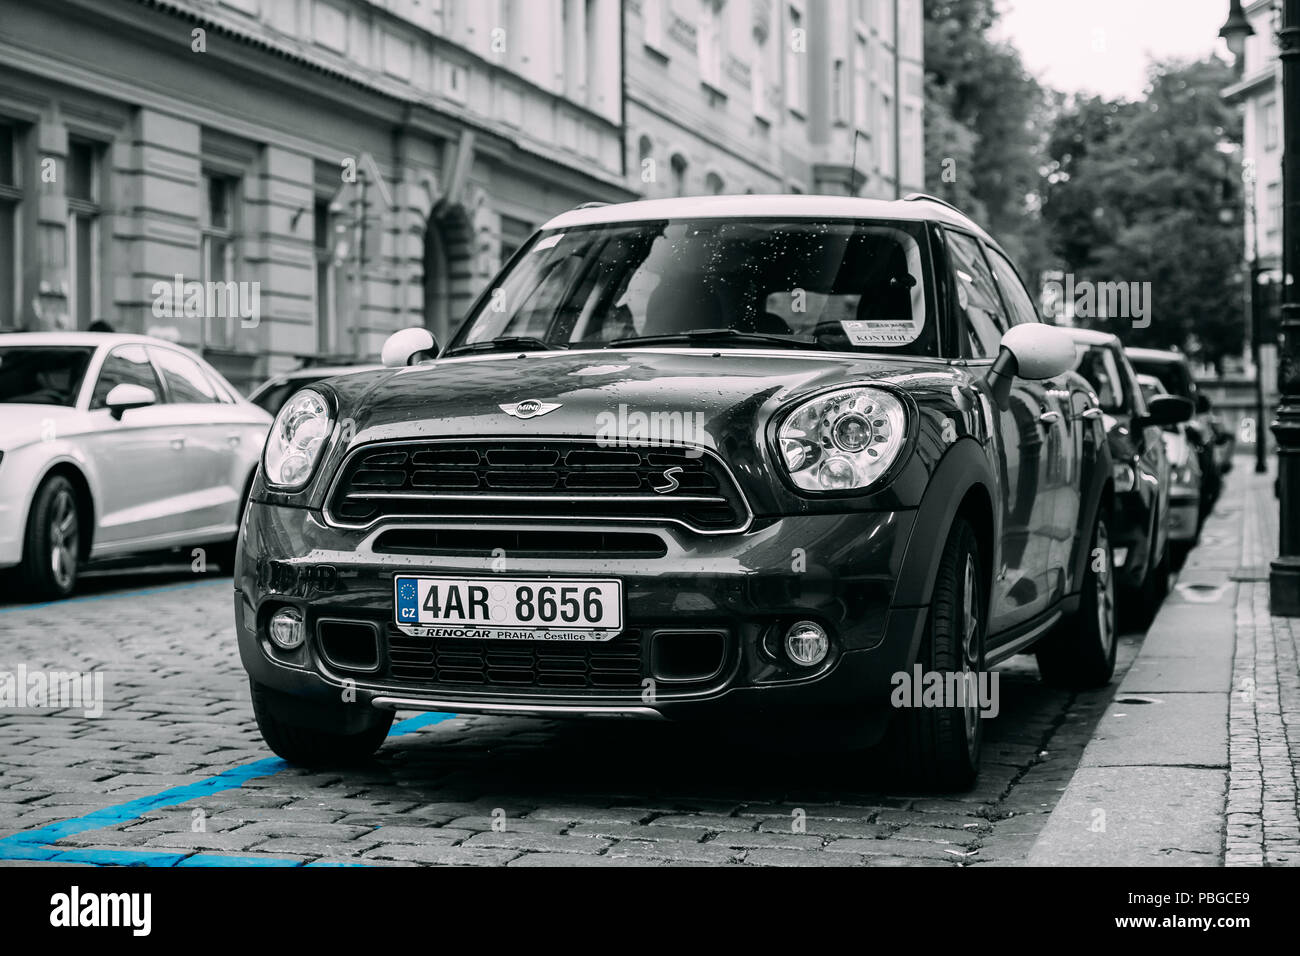 Prague, Czech Republic - September 24, 2017: Black Mini Cooper Countryman S All4 Sd Car With 2.0 Litre Turbodiesel Engine Parked In Street. Car Of Sec Stock Photo